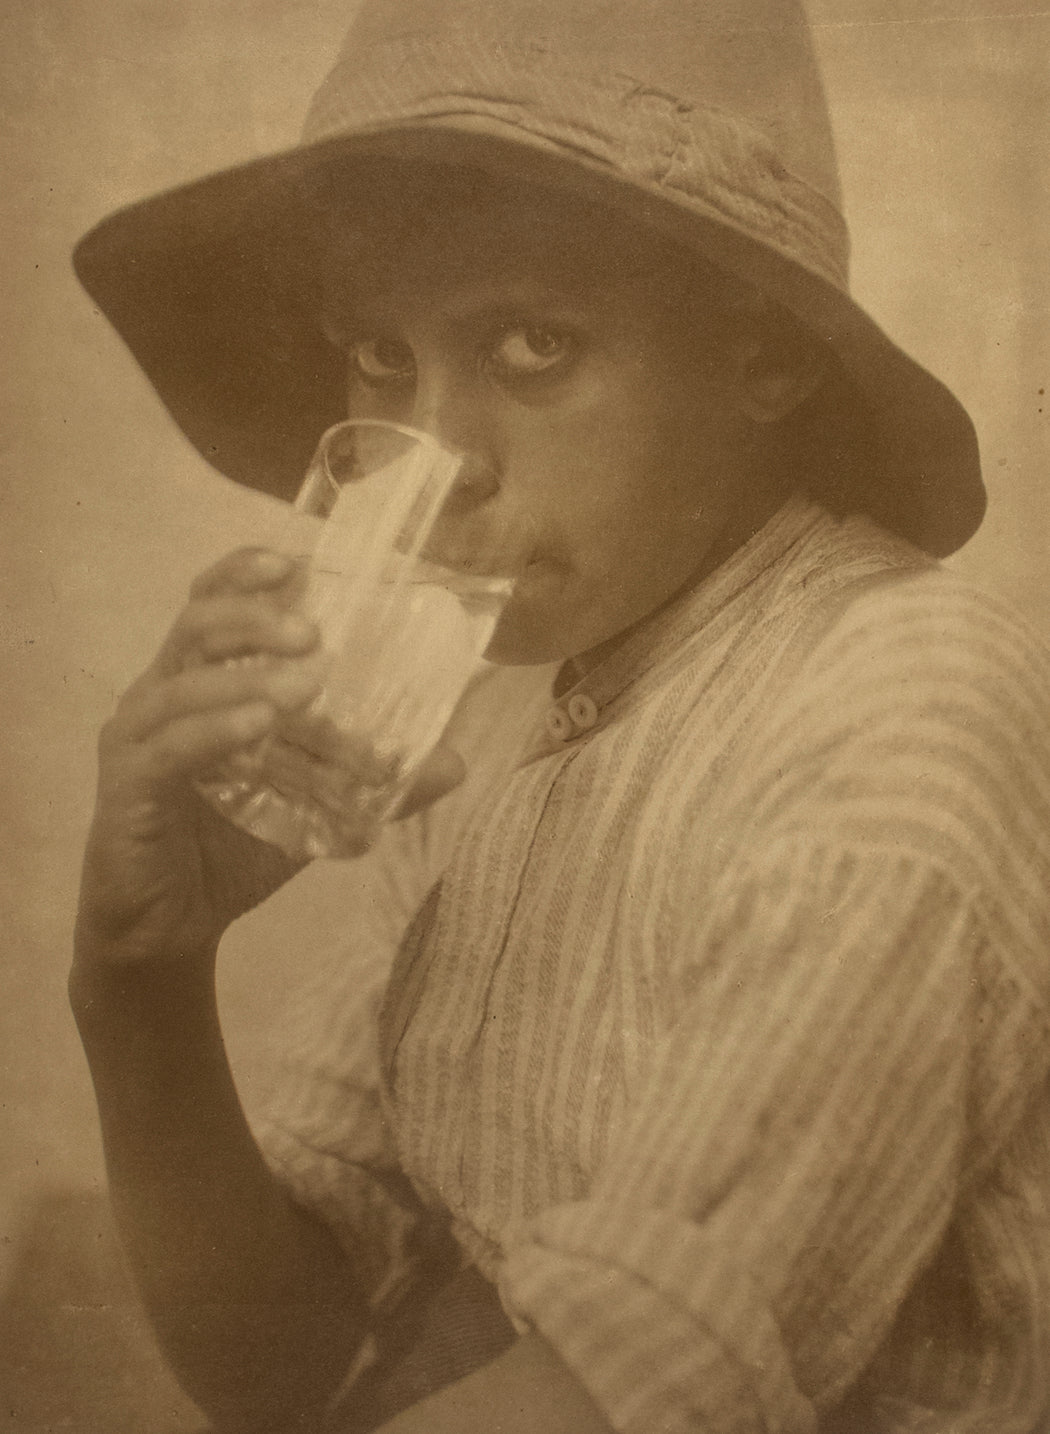 Untitled [Young boy drinking from a glass]